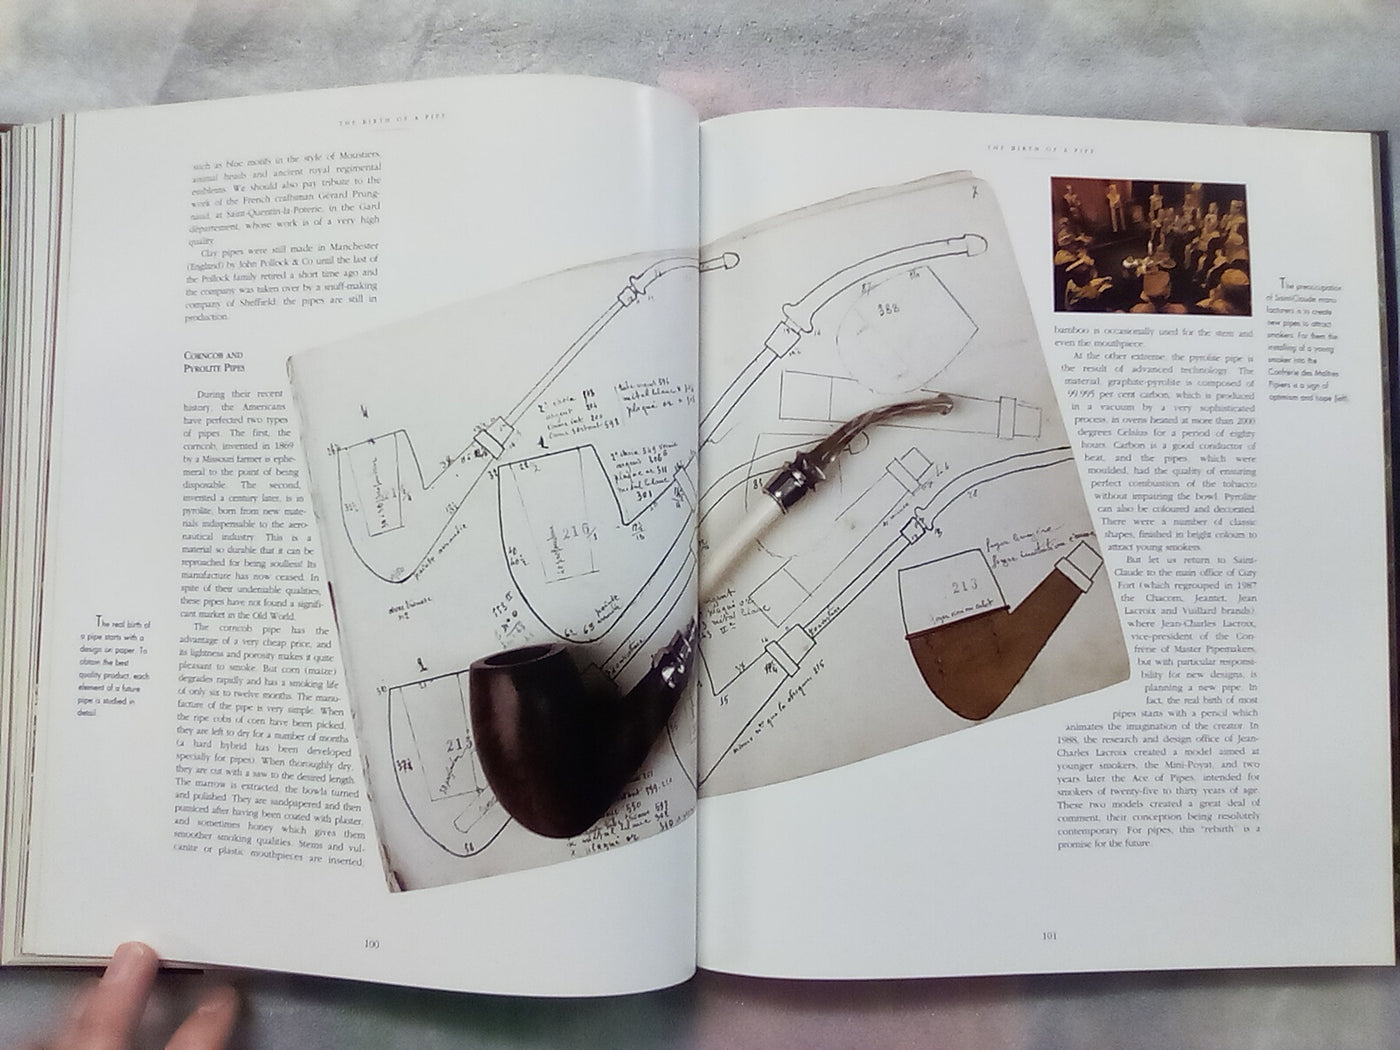 The Illustrated History of the Pipe by Alexis Liebaert and Alain Maya